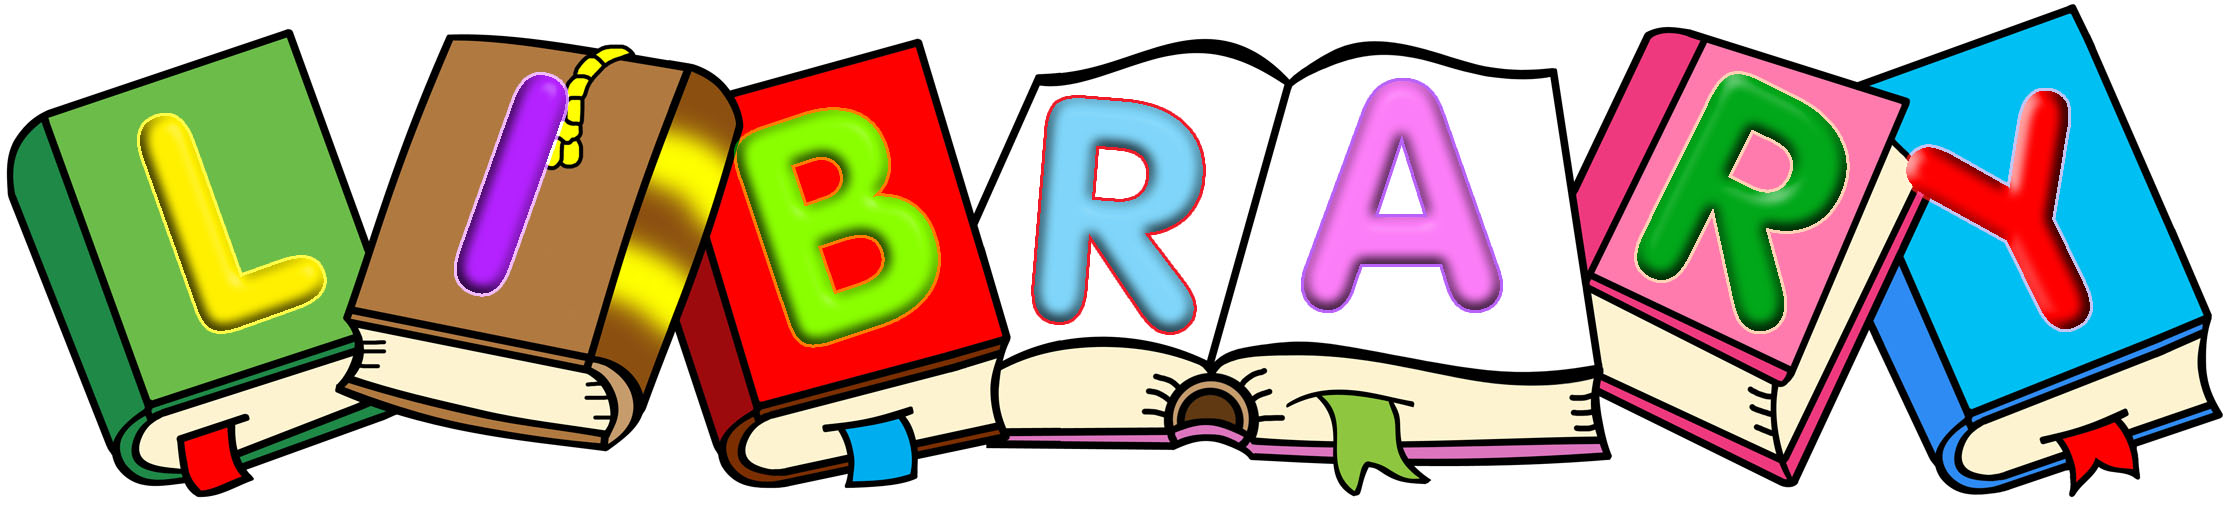 school library clipart - photo #13